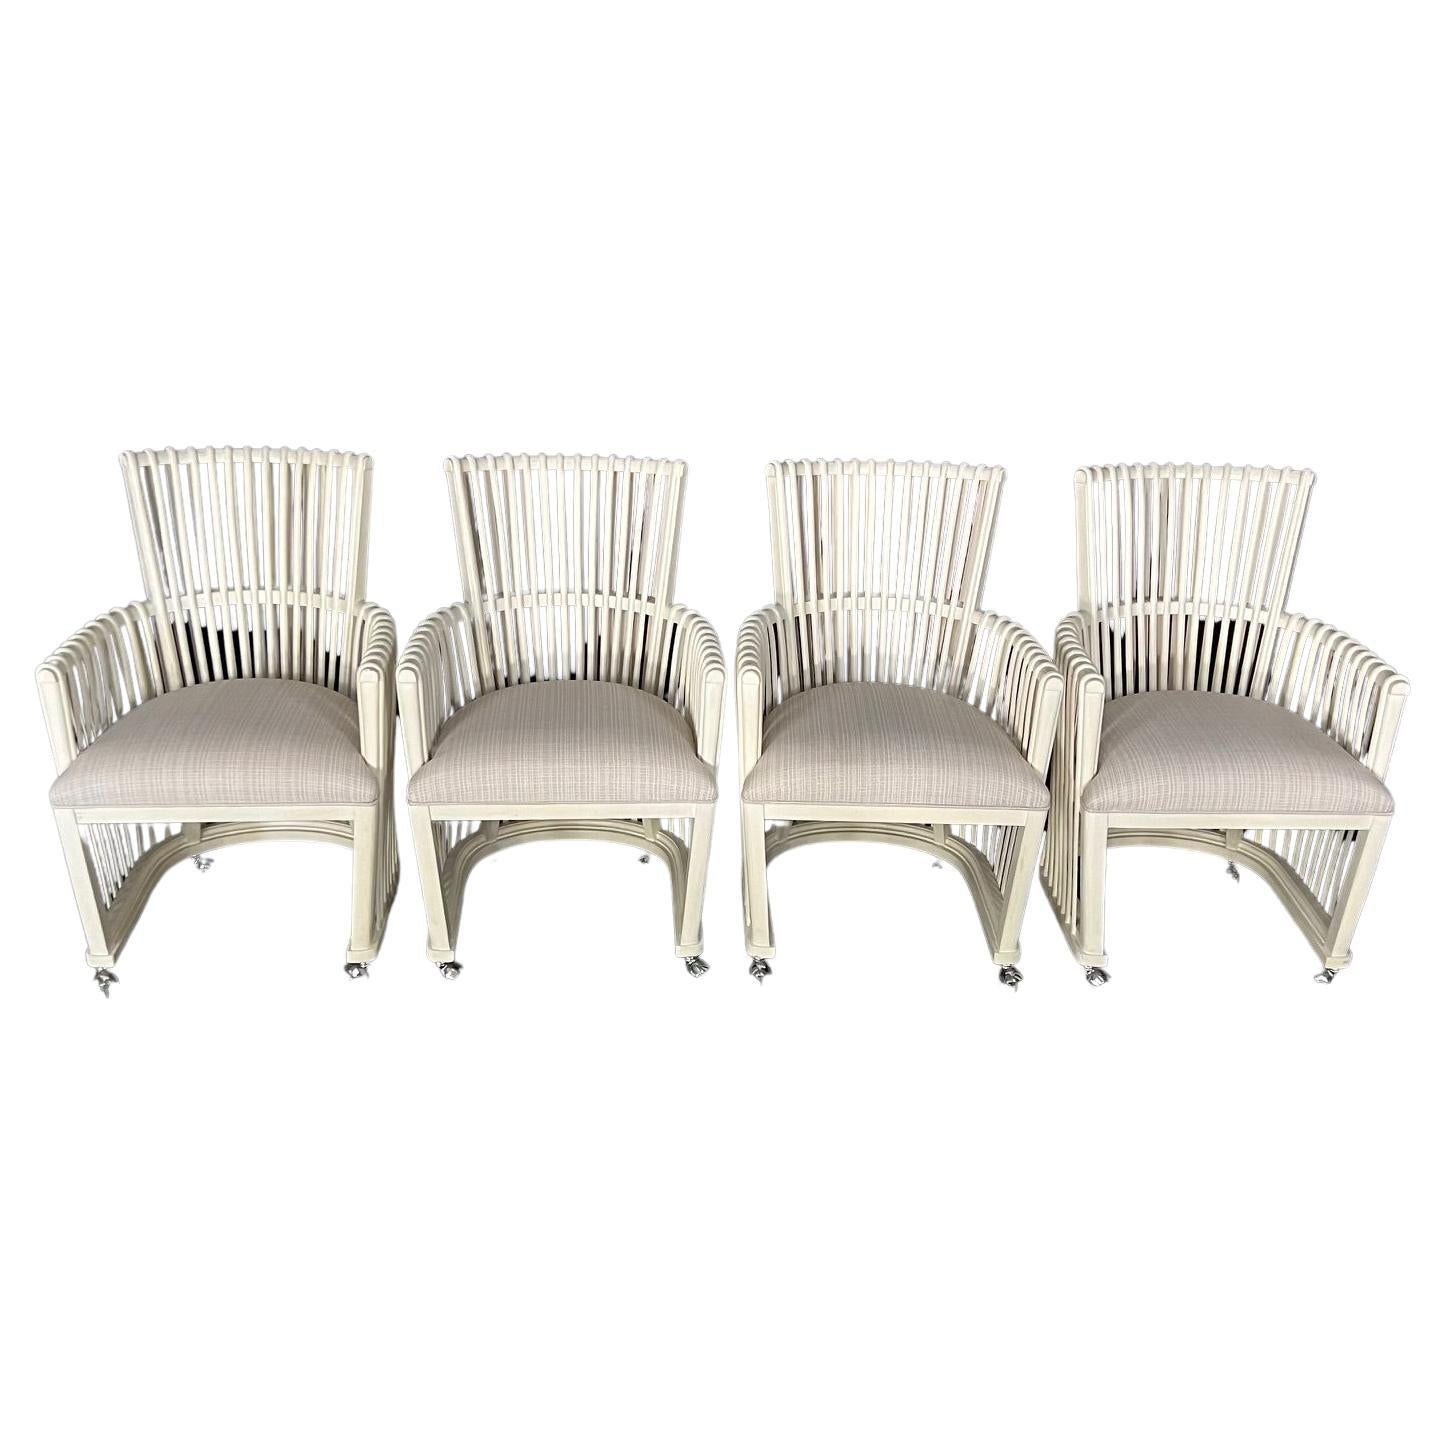 Set of Four White Bent Rattan Dining or Club Chairs with Casters